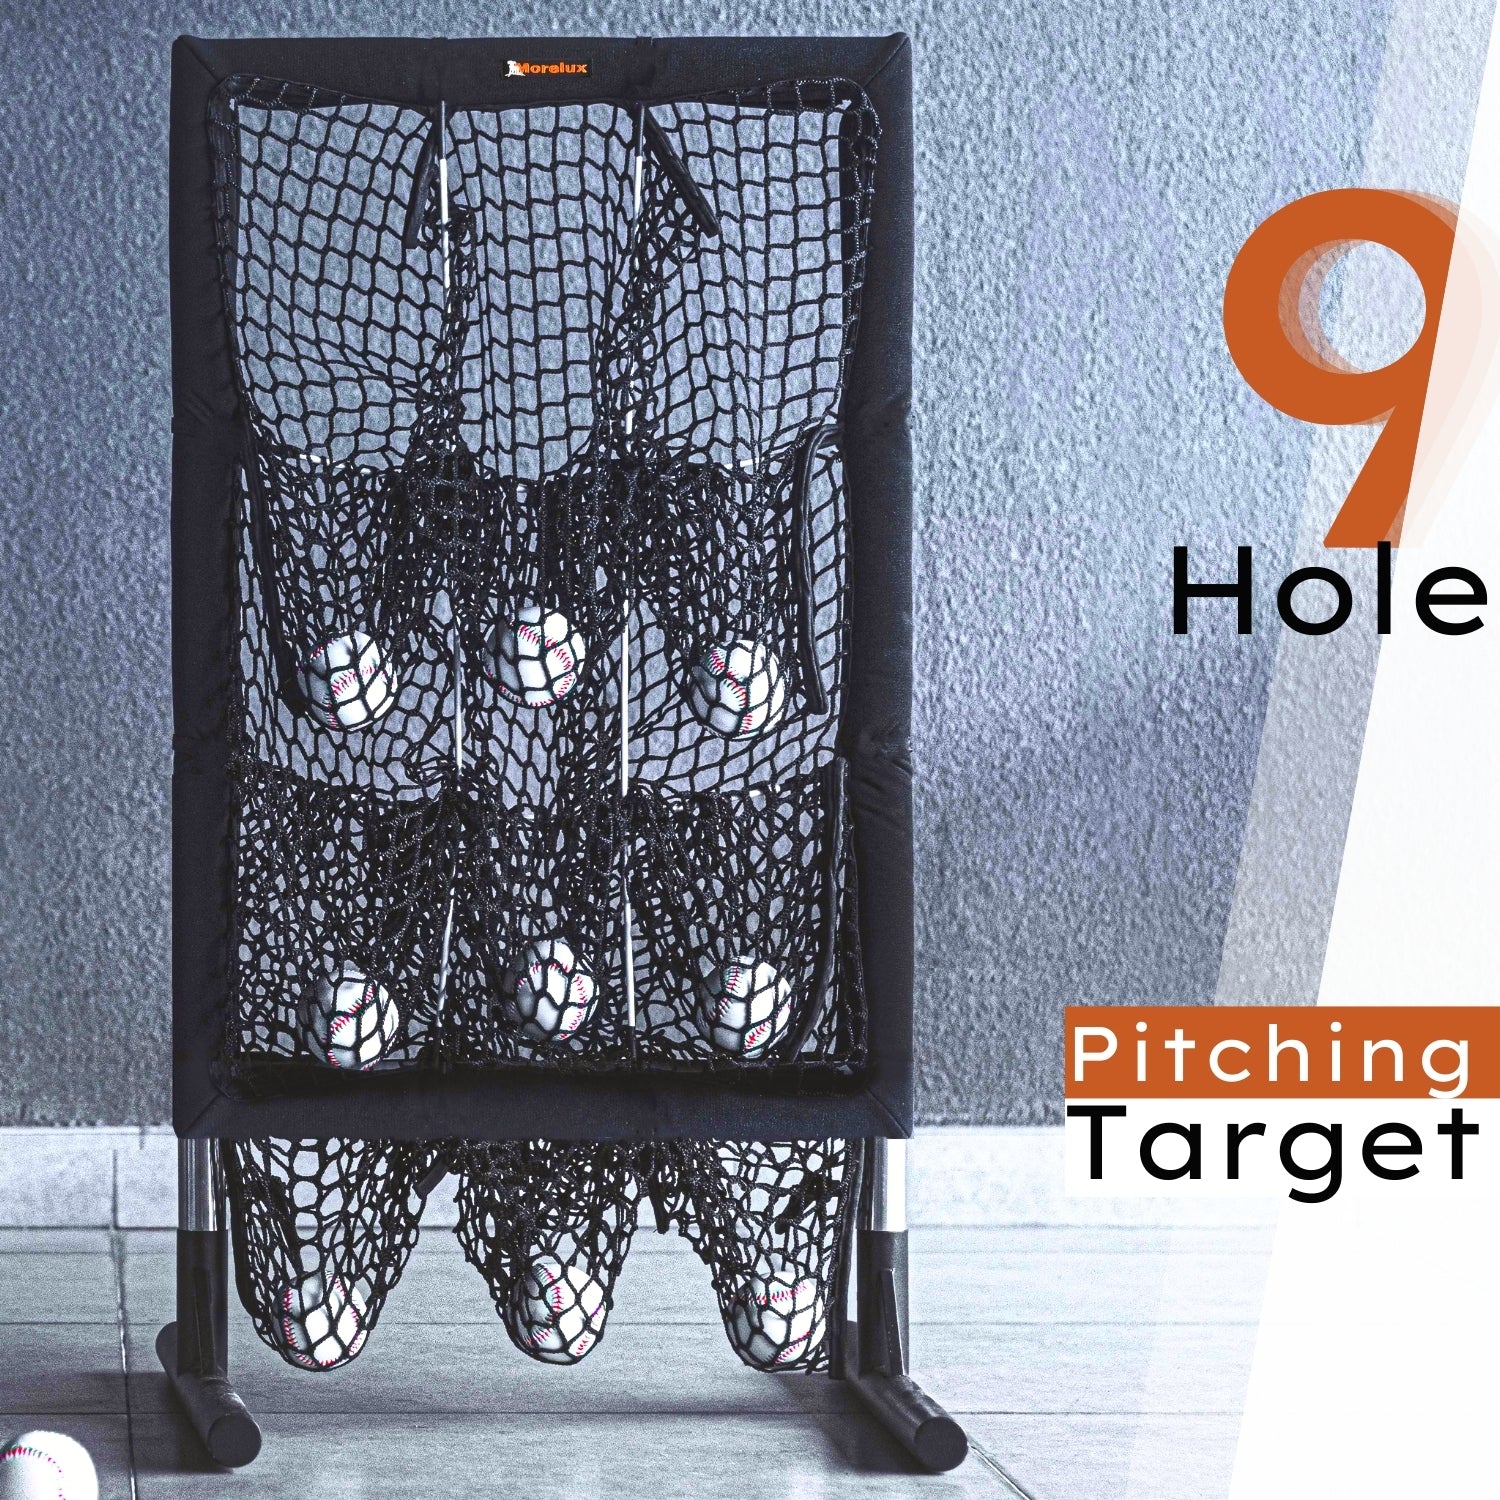 Pitching Net with Strike Zone - 9 Hole Pitching Target - Pitcher Practice Net - Baseball Net Aids for Training - Heavy Duty Pitching Equipment